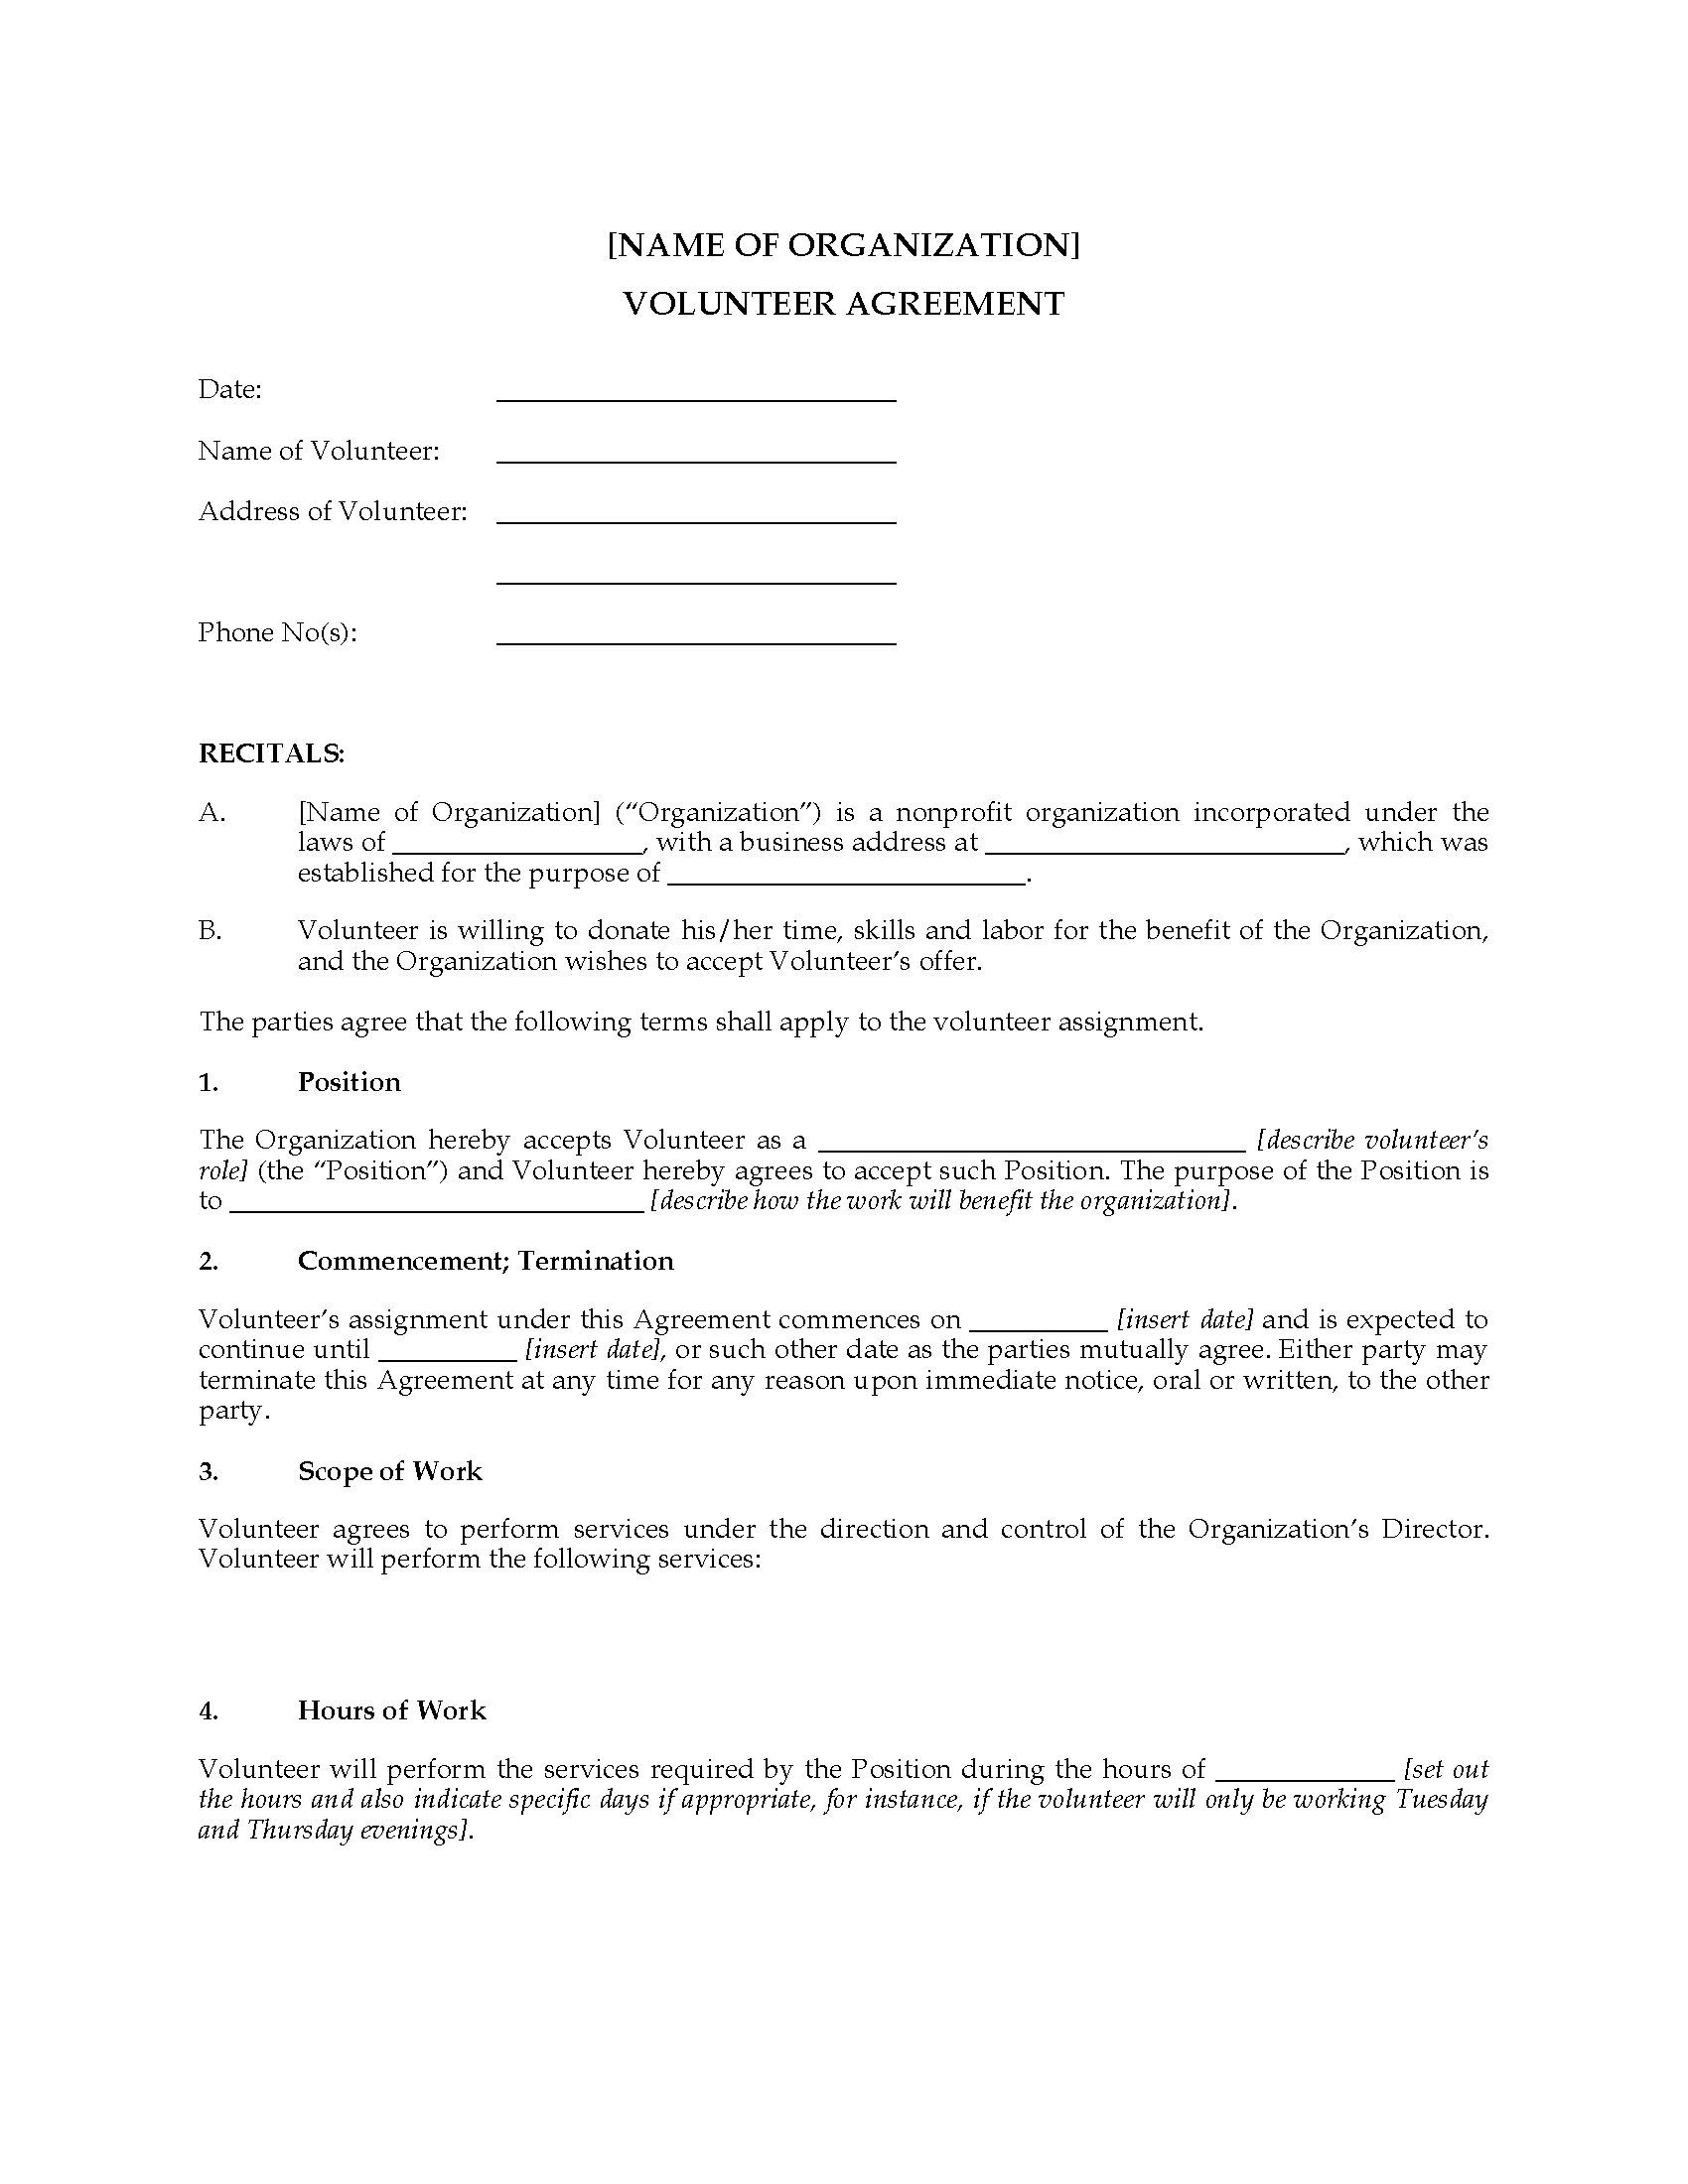 Volunteer Agreement Form Legal Forms and Business Templates